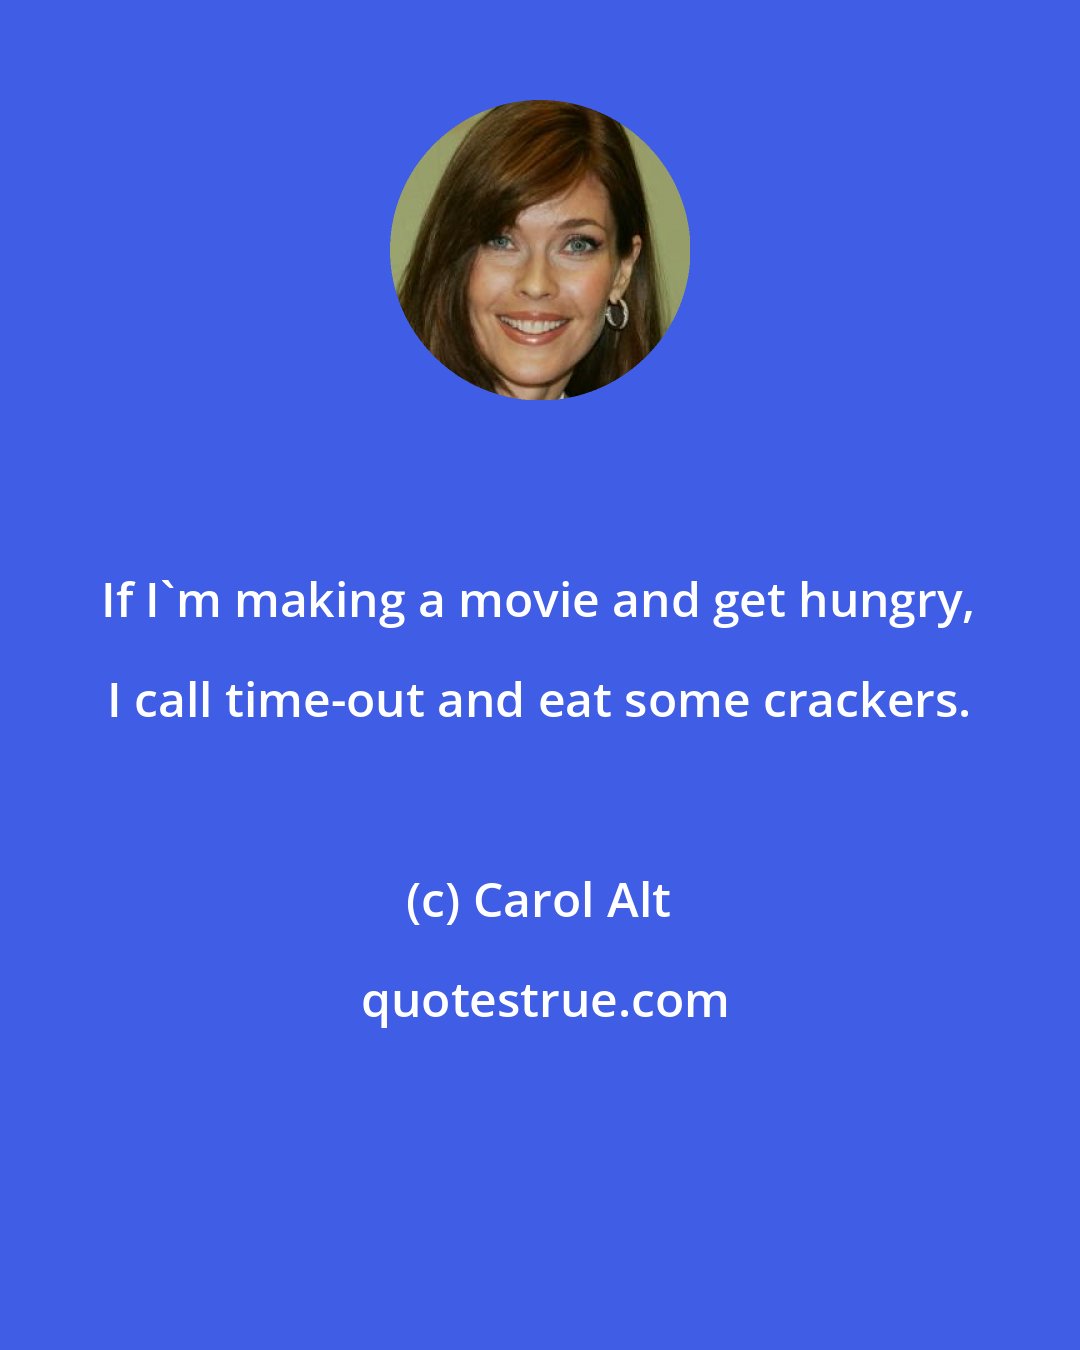 Carol Alt: If I'm making a movie and get hungry, I call time-out and eat some crackers.